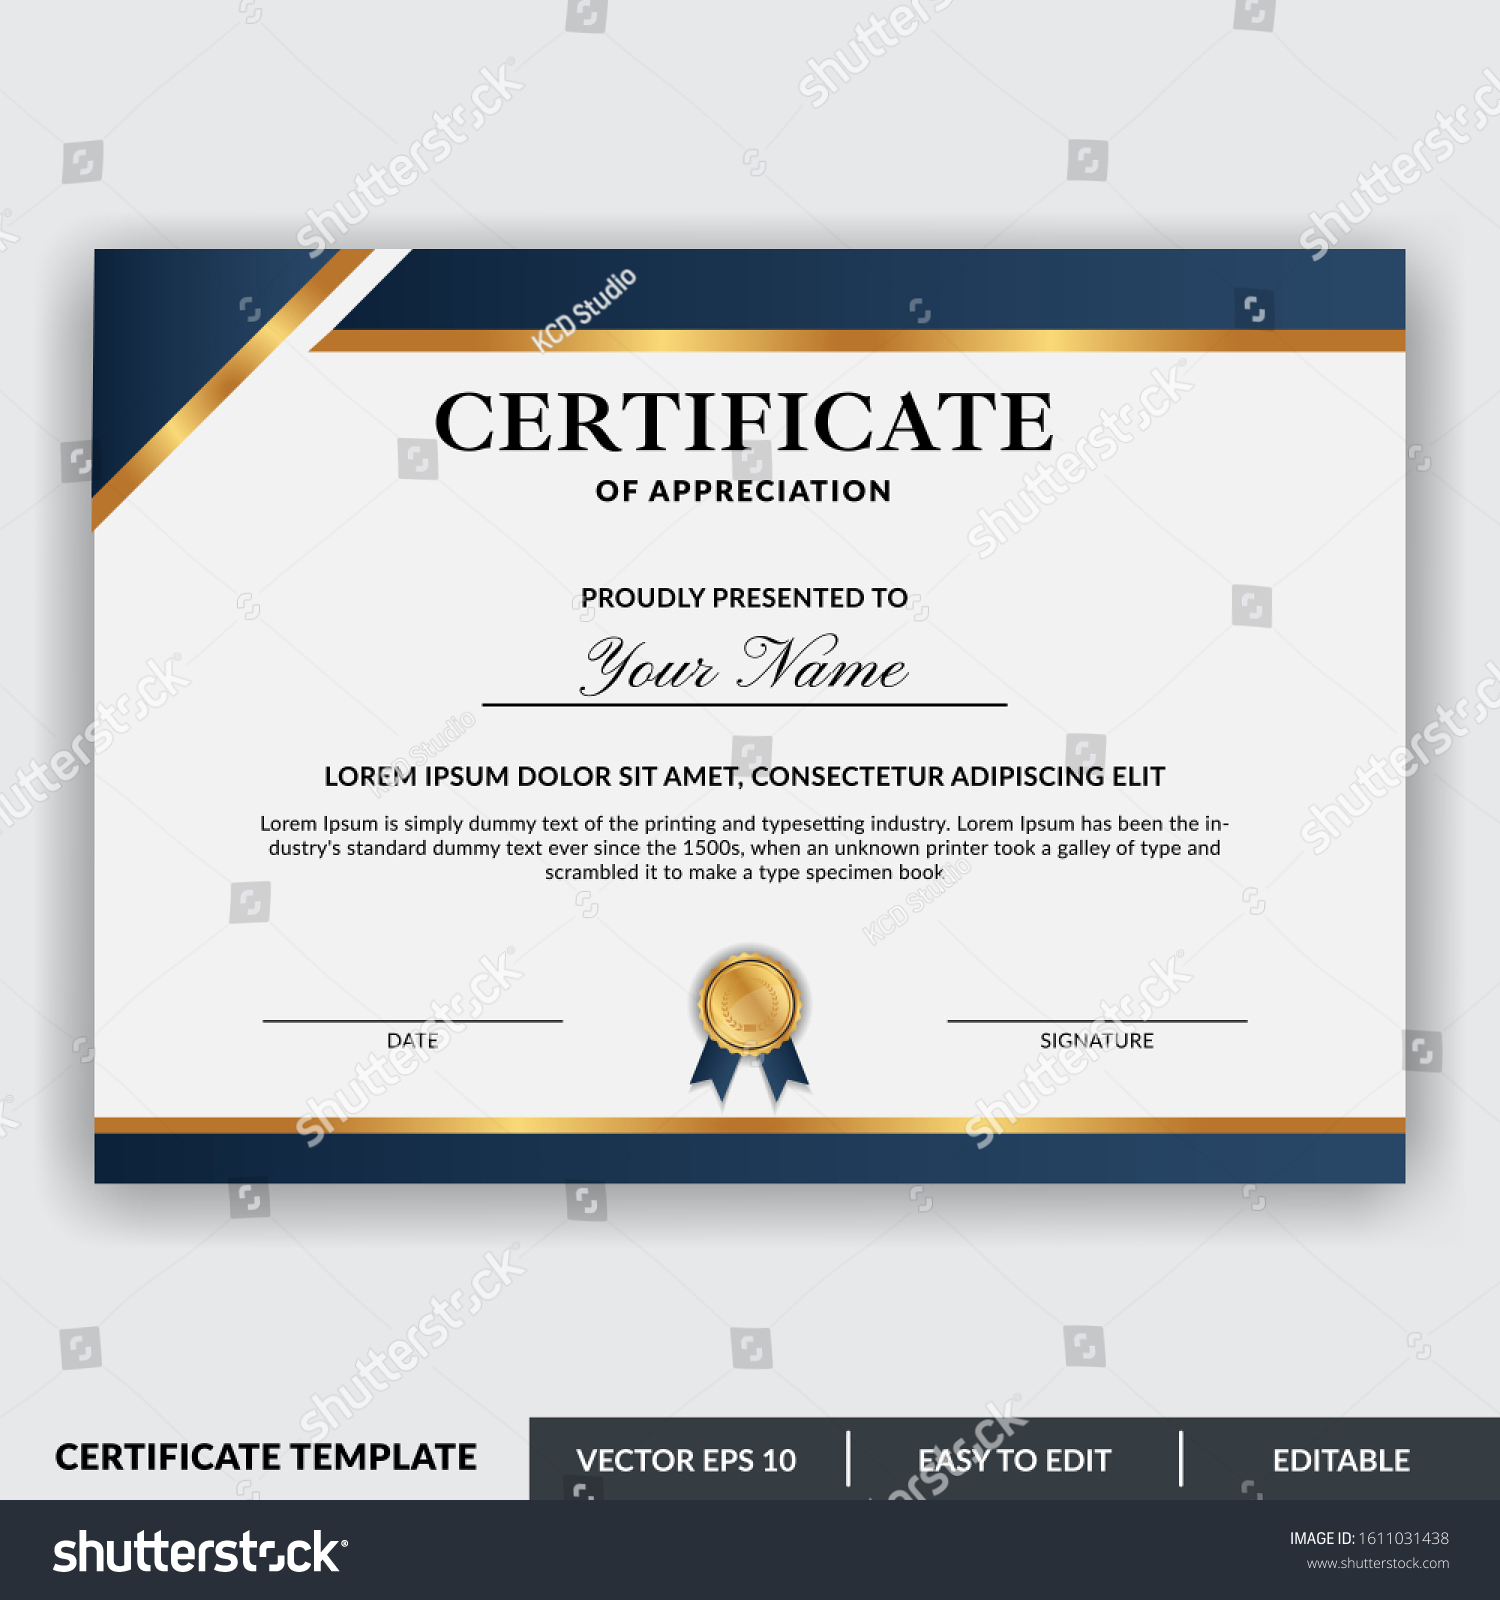 Certificate Appreciation Award Template Design Vector Stock Vector Intended For Free Certificate Of Appreciation Template Downloads